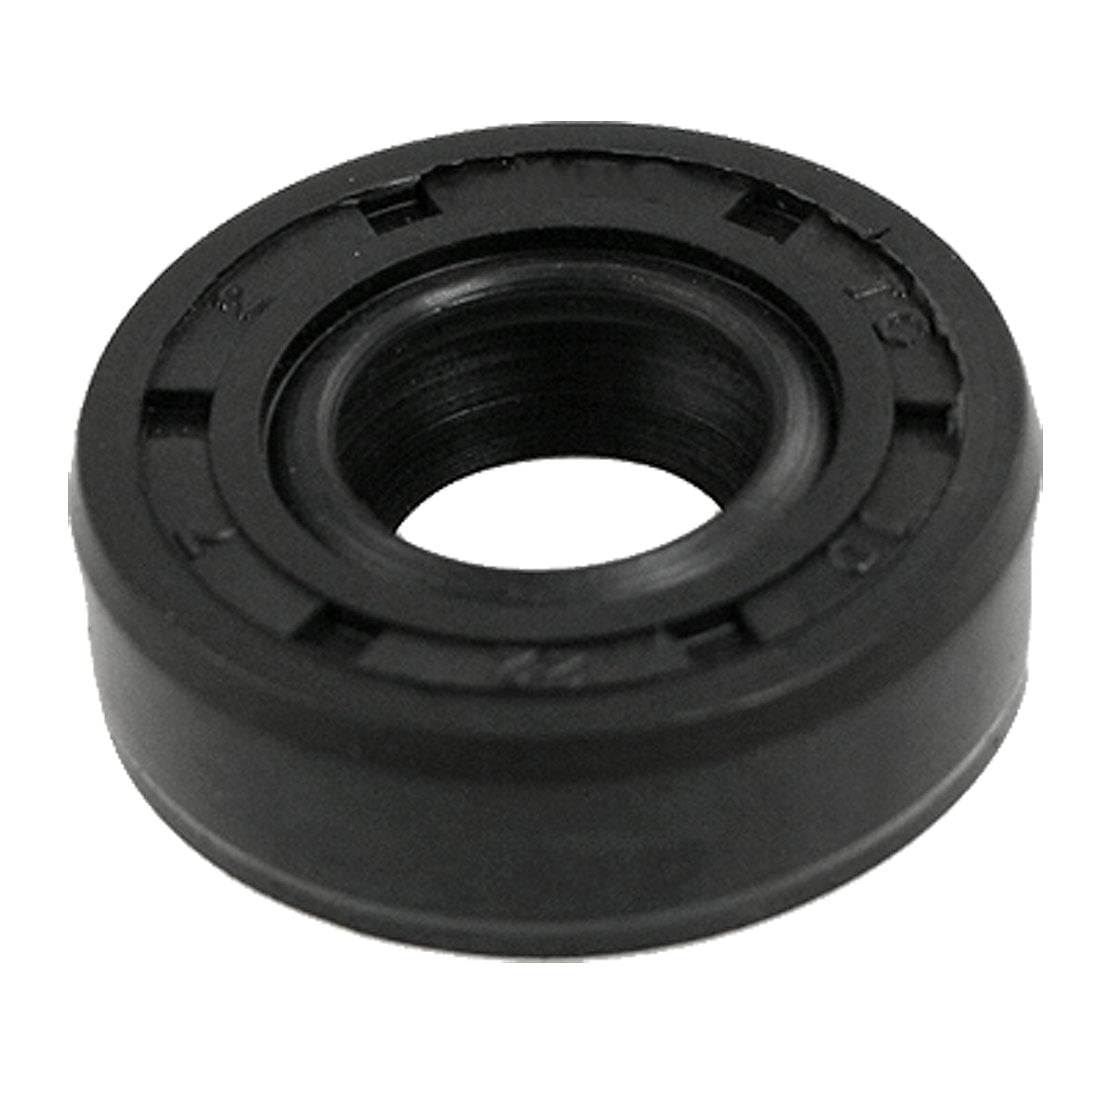 Metric Oil Shaft Seal 17 x 40 x 7mm Double Lip  Price for 1 pc 